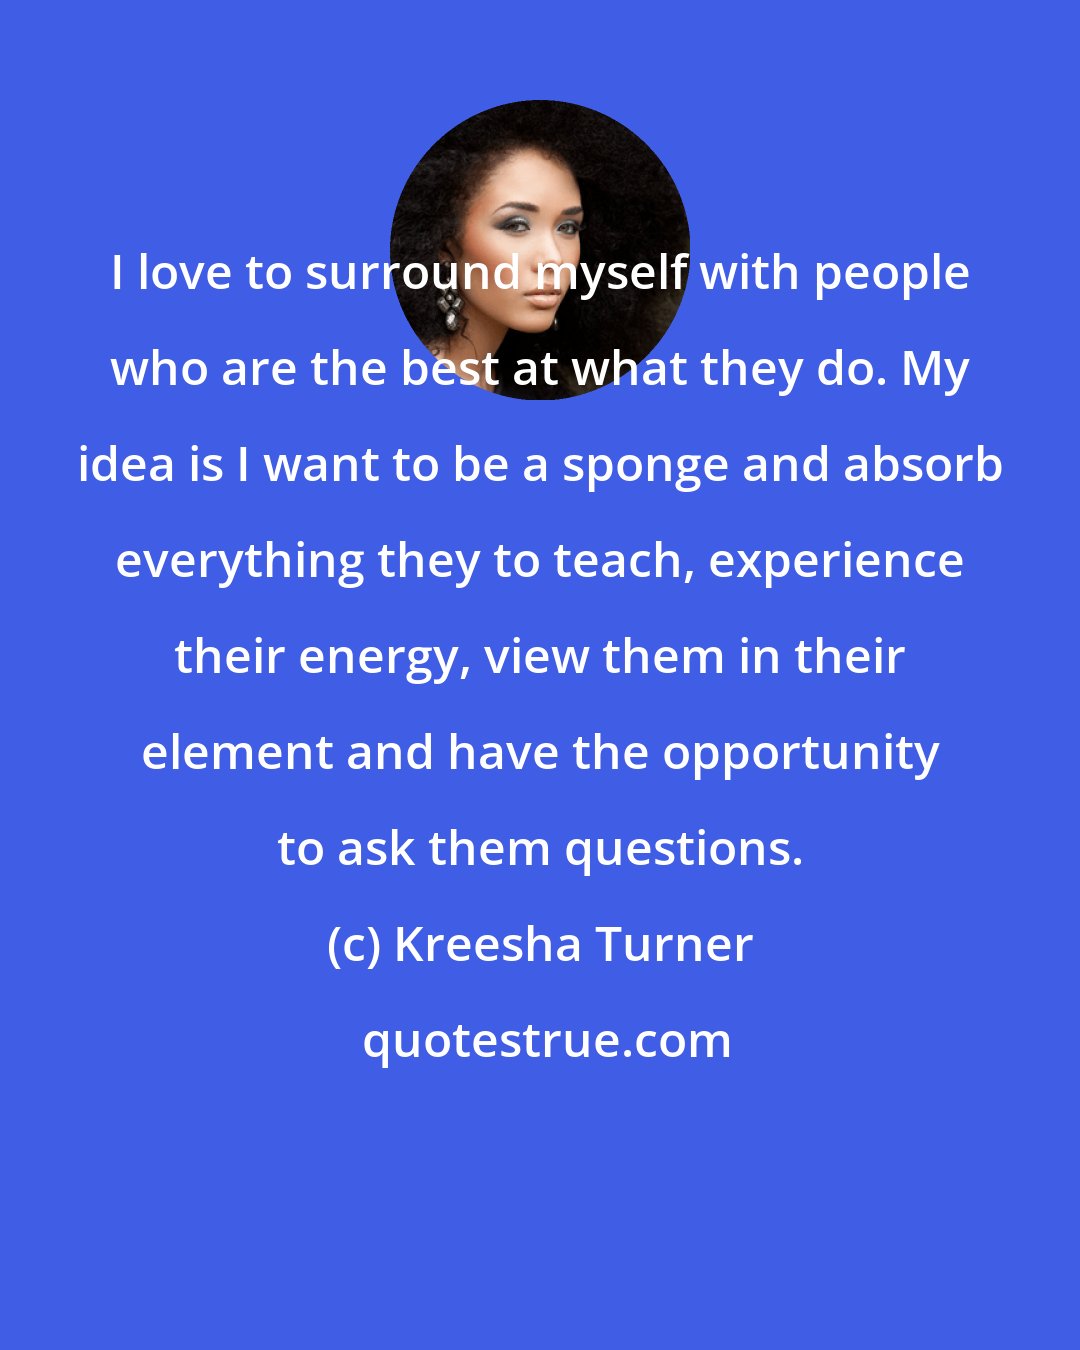 Kreesha Turner: I love to surround myself with people who are the best at what they do. My idea is I want to be a sponge and absorb everything they to teach, experience their energy, view them in their element and have the opportunity to ask them questions.